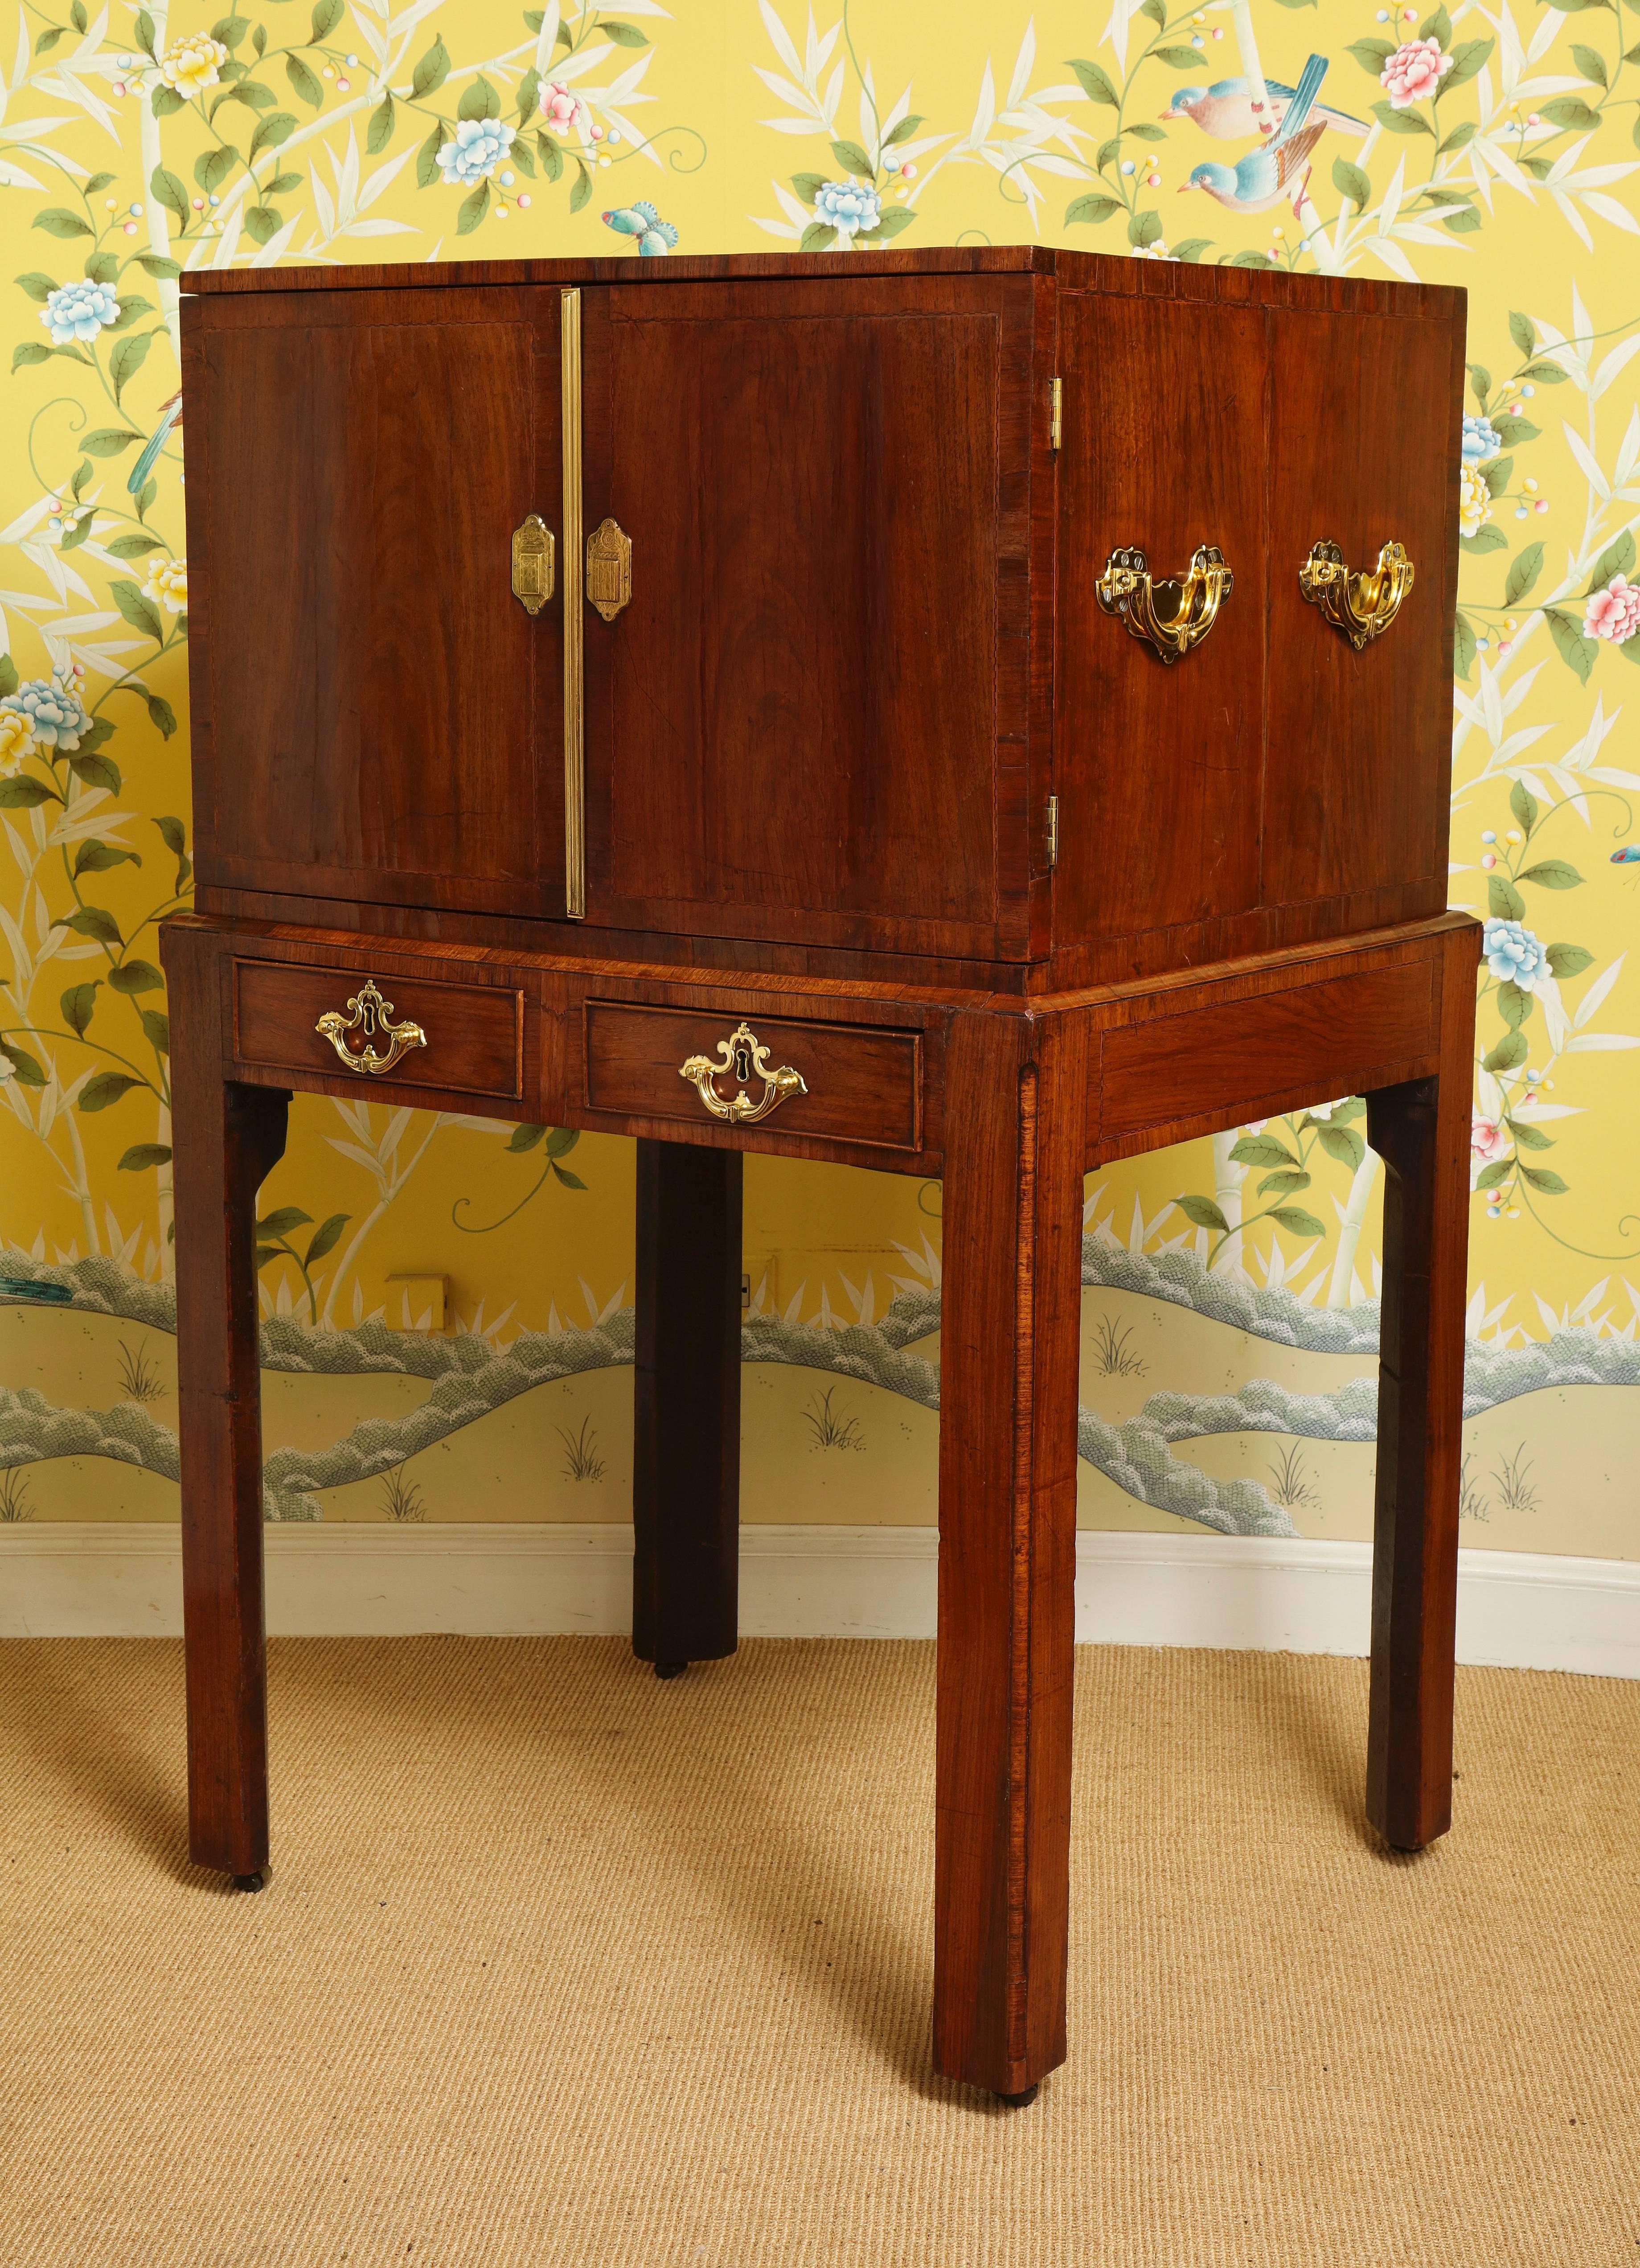 Very fine George II Padouk and walnut cabinet on stand, the cabinet is unusual in that it is finished on all four sides with finely book matched veneers inlaid with checkering and crossbanding. The cabinet with a pair of doors veneered on both sides